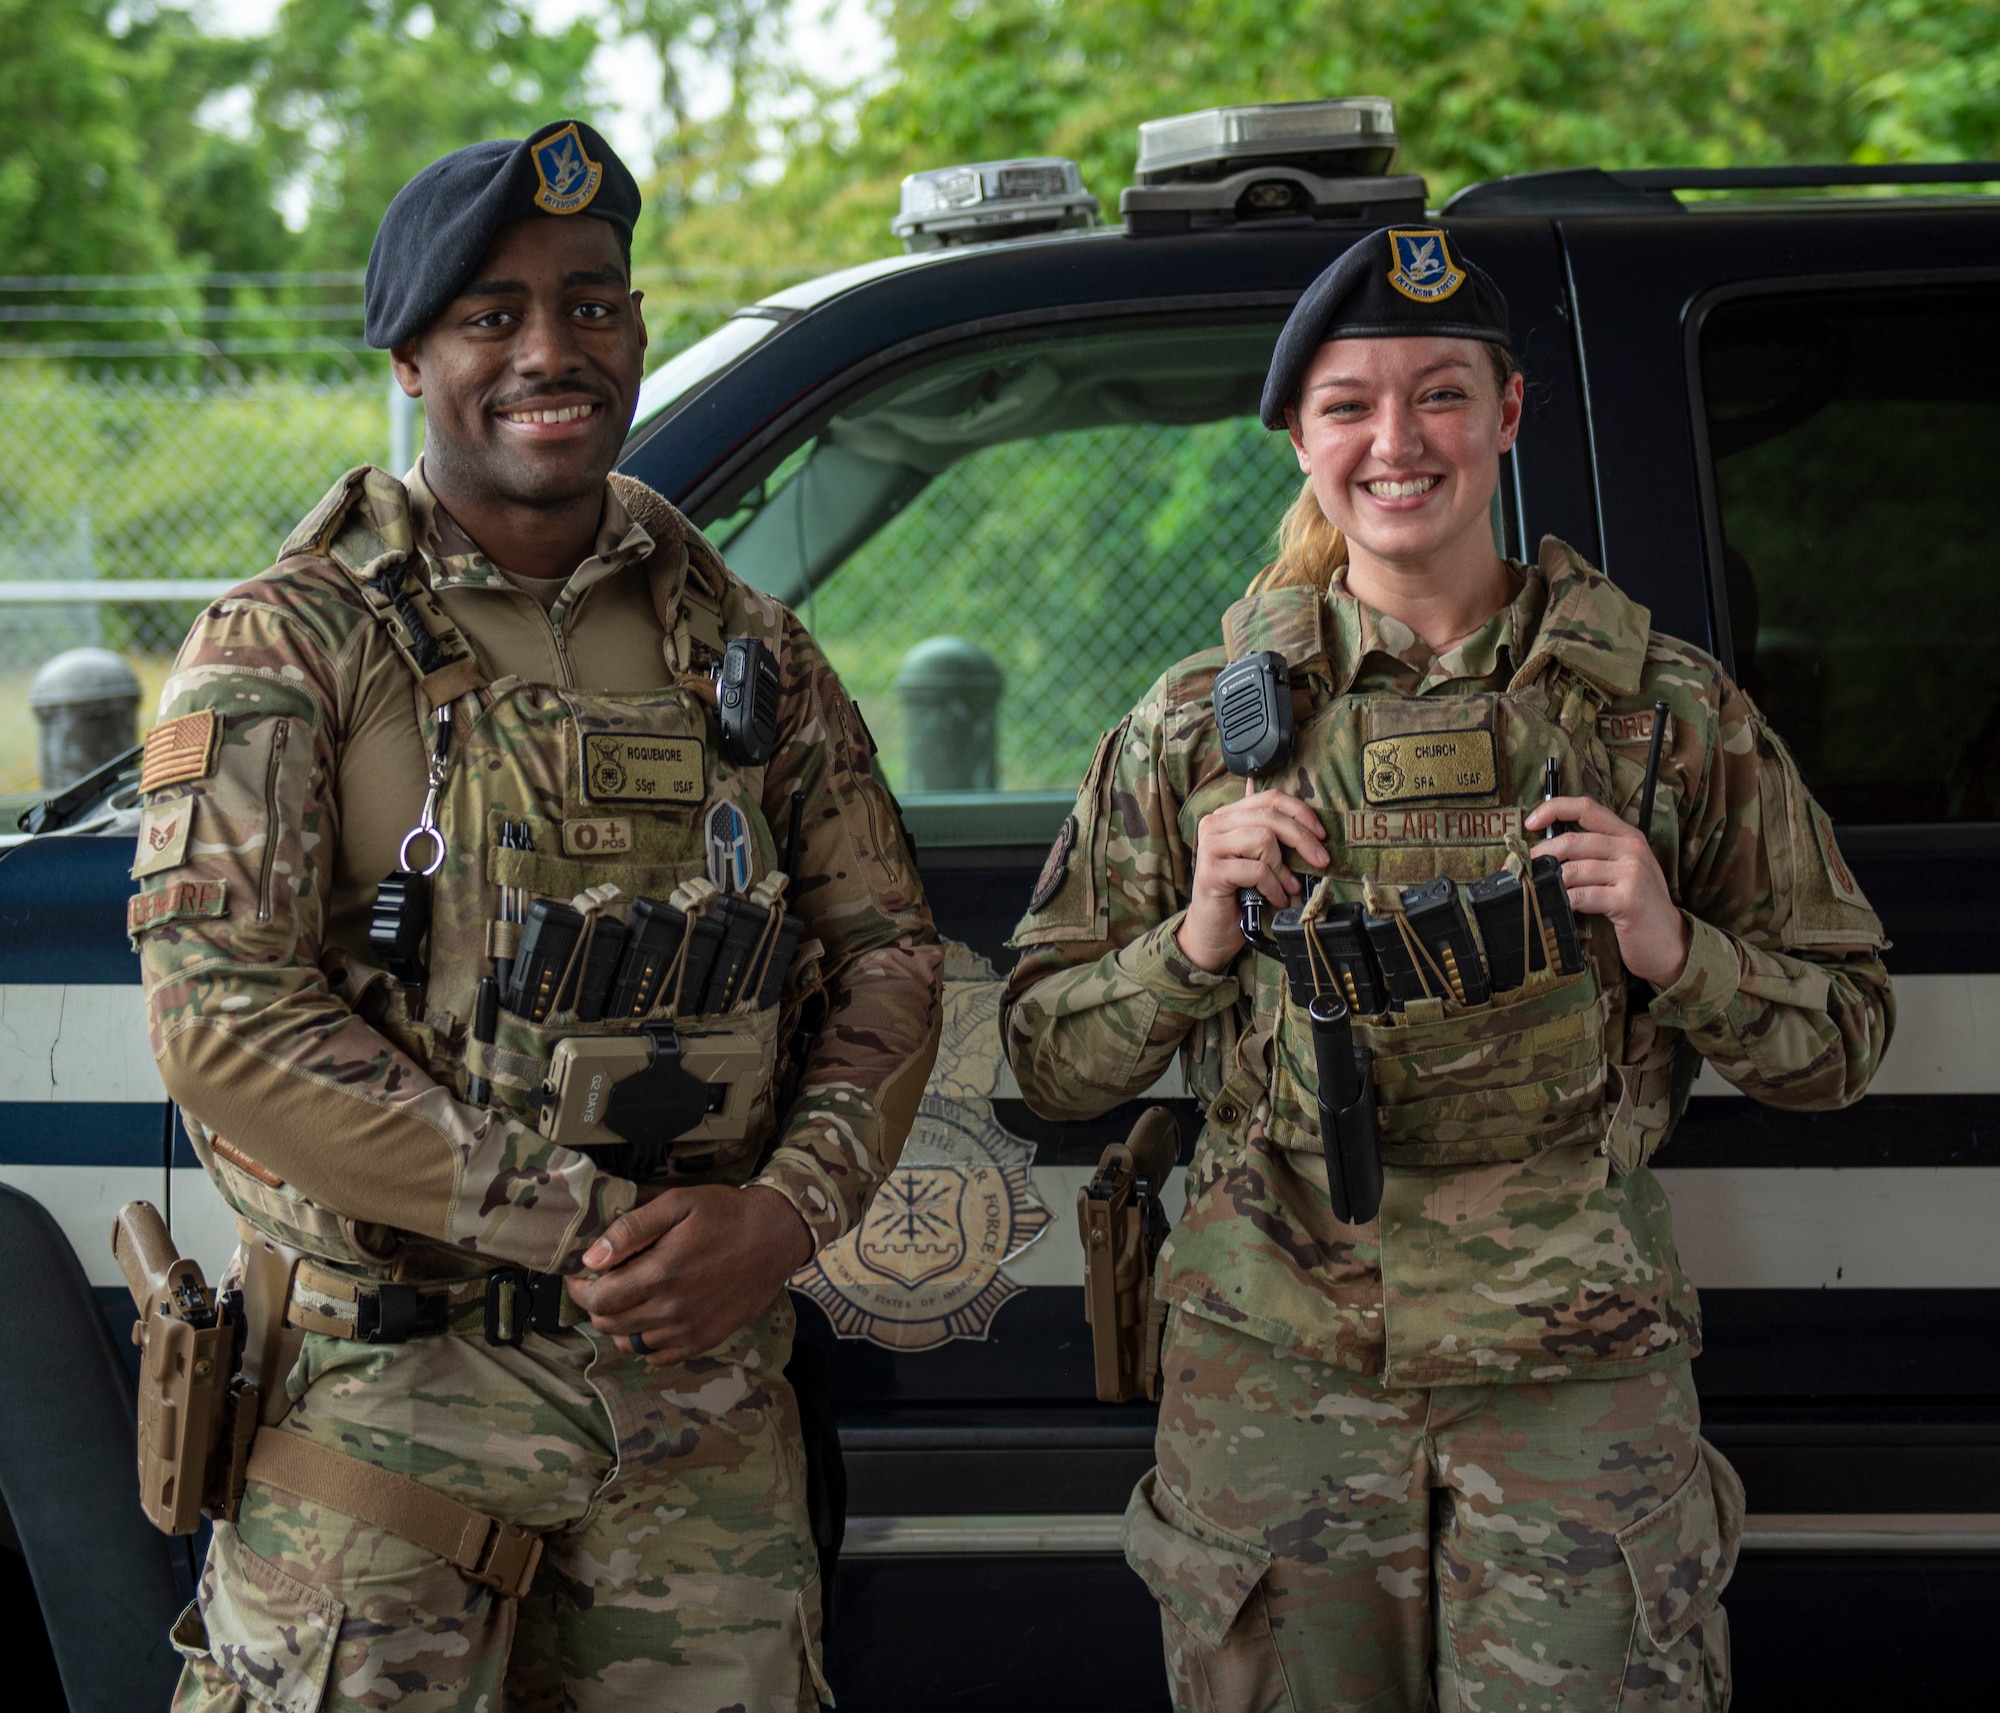 Staff Sgt. Marquez Roquemore, 4th Security Force Squadron patrolman, and Senior Airman Leighanna Church, 4th SFS desk sergeant, enforce security at an entry control point at Seymour Johnson Air Force Base, North Carolina, May 12, 2022. The 4th SFS is recognizing all law enforcement who are currently serving or gave their life on the line of duty during National Police Week. (U.S. Air Force photo by Airman 1st Class Sabrina Fuller)